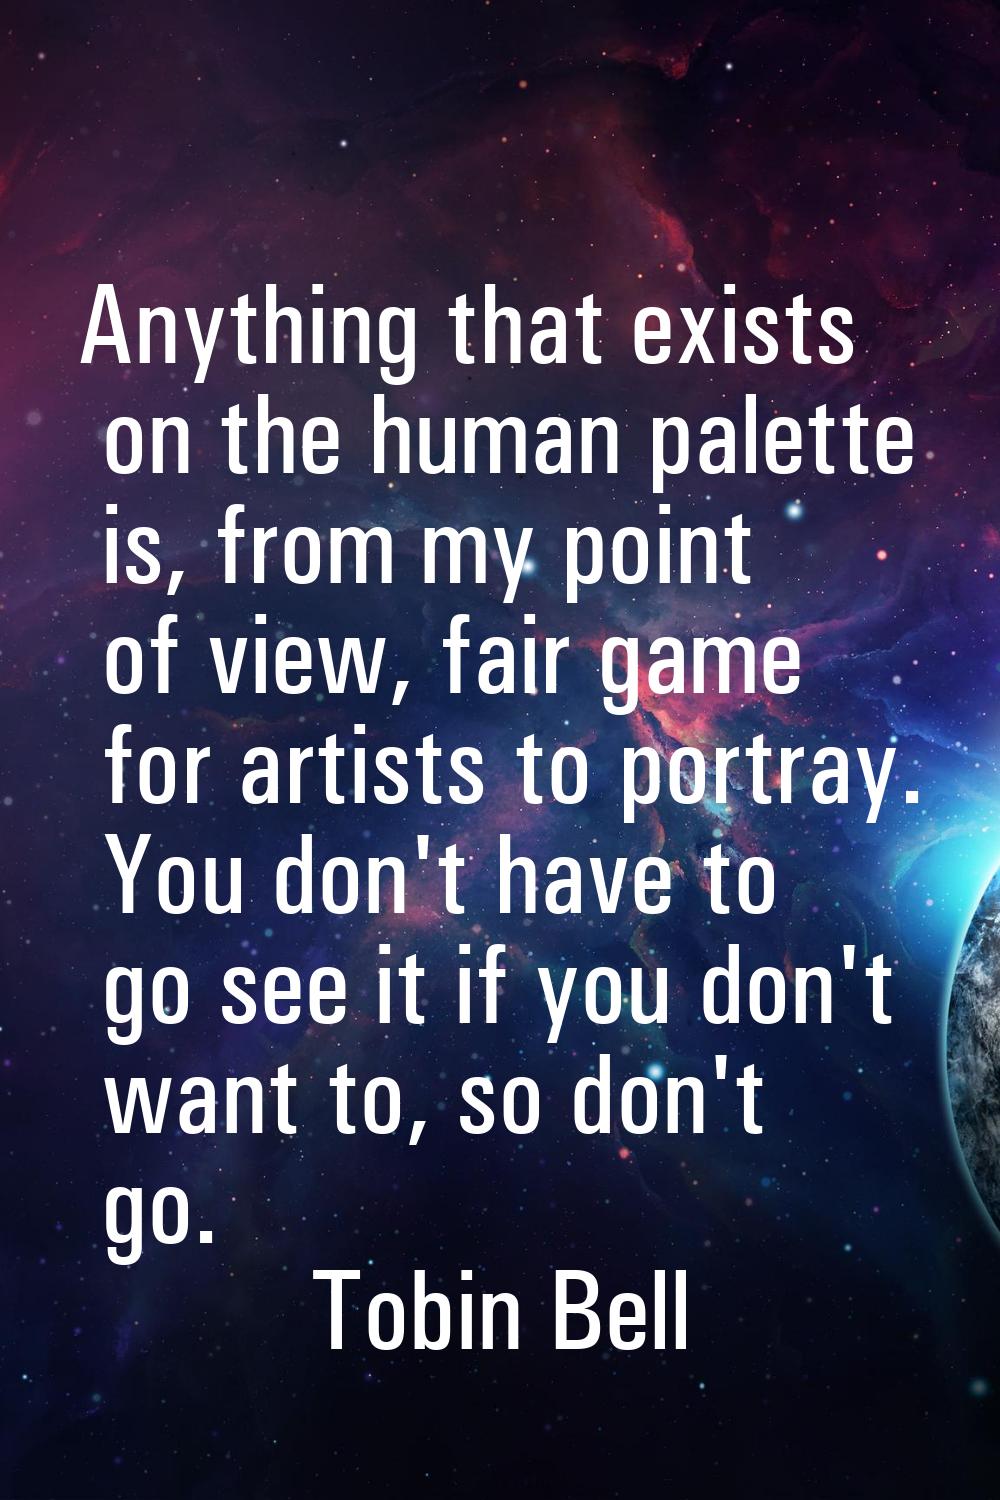 Anything that exists on the human palette is, from my point of view, fair game for artists to portr